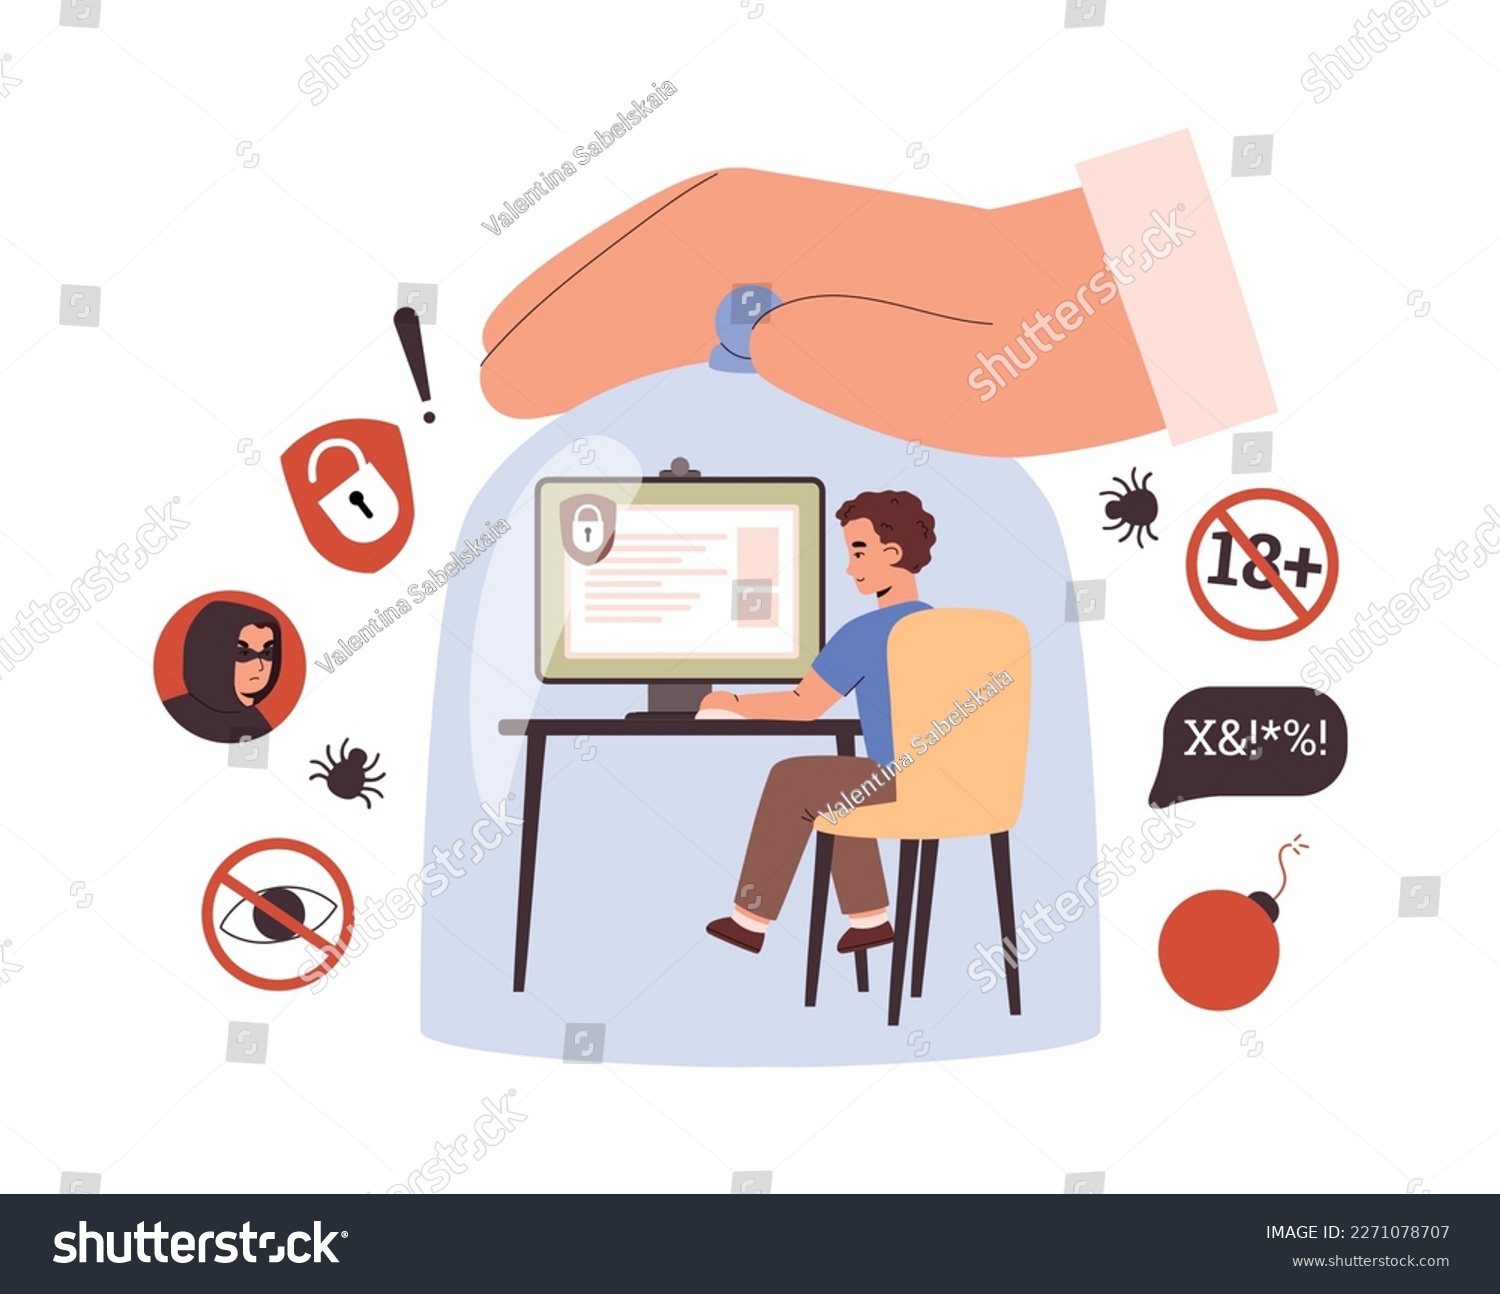 SVG of Kid boy sitting under large glass jar flat style, vector illustration isolated on white background. Children internet safety concept, huge hand, protection from stranger and inappropriate content svg